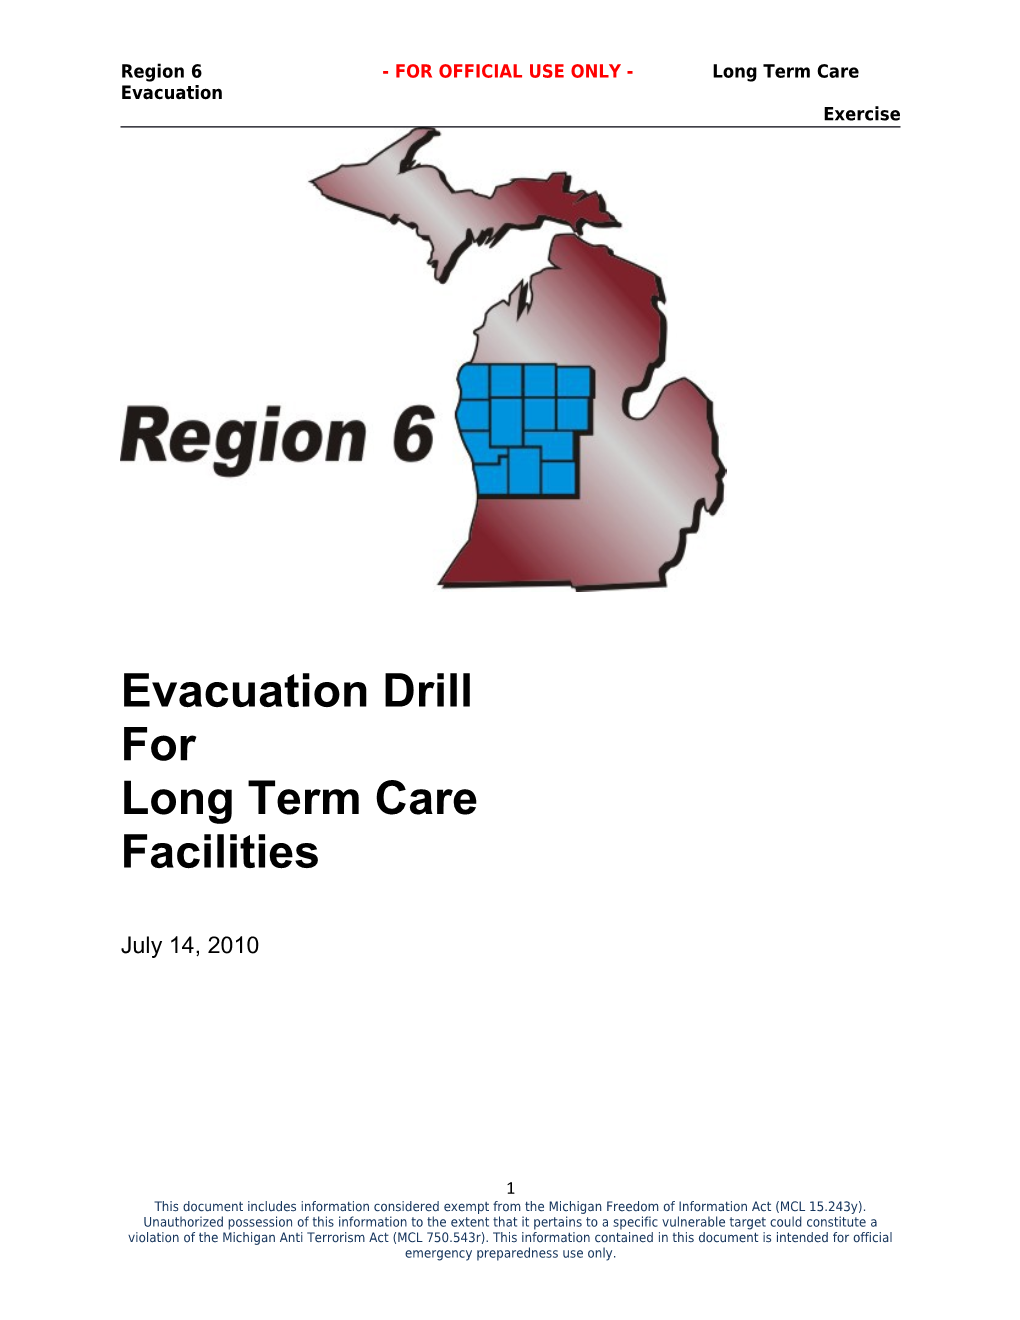 Region 6 - for OFFICIAL USE ONLY - Long Term Care Evacuation